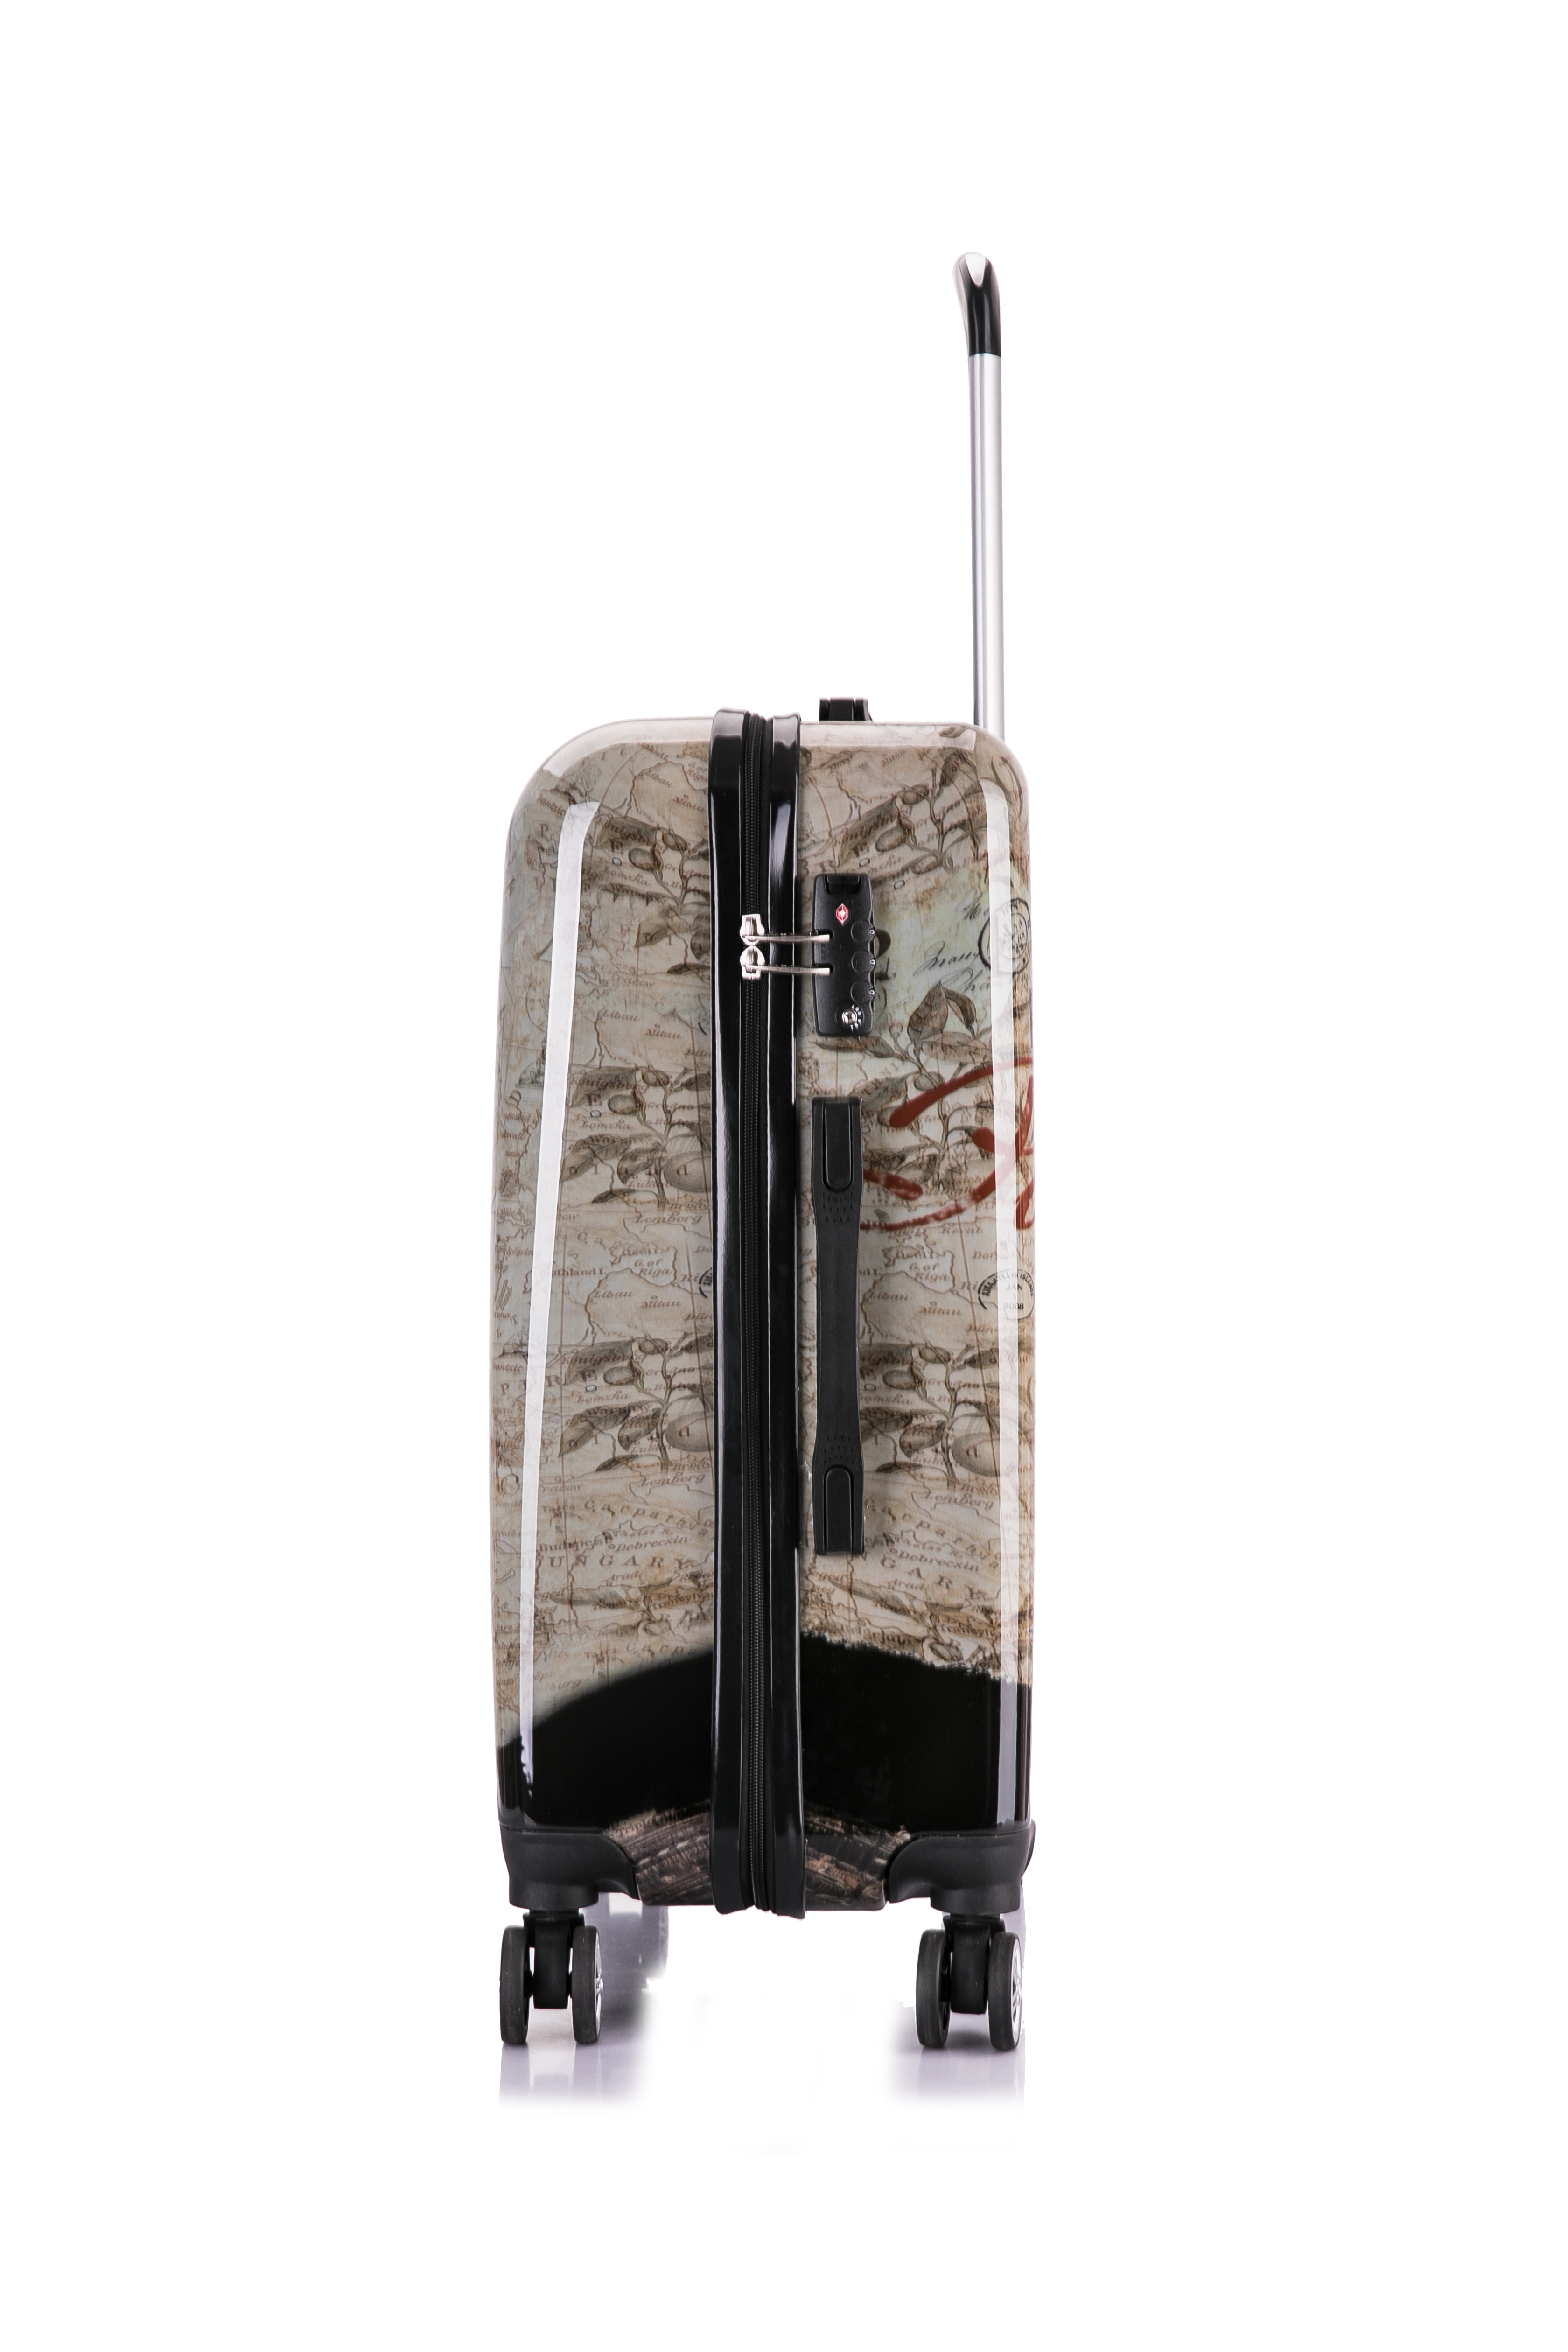 InUSA Print 24" Hardside Checked Luggage with Spinner Wheels, Handle and Trolley, Paris - image 4 of 15